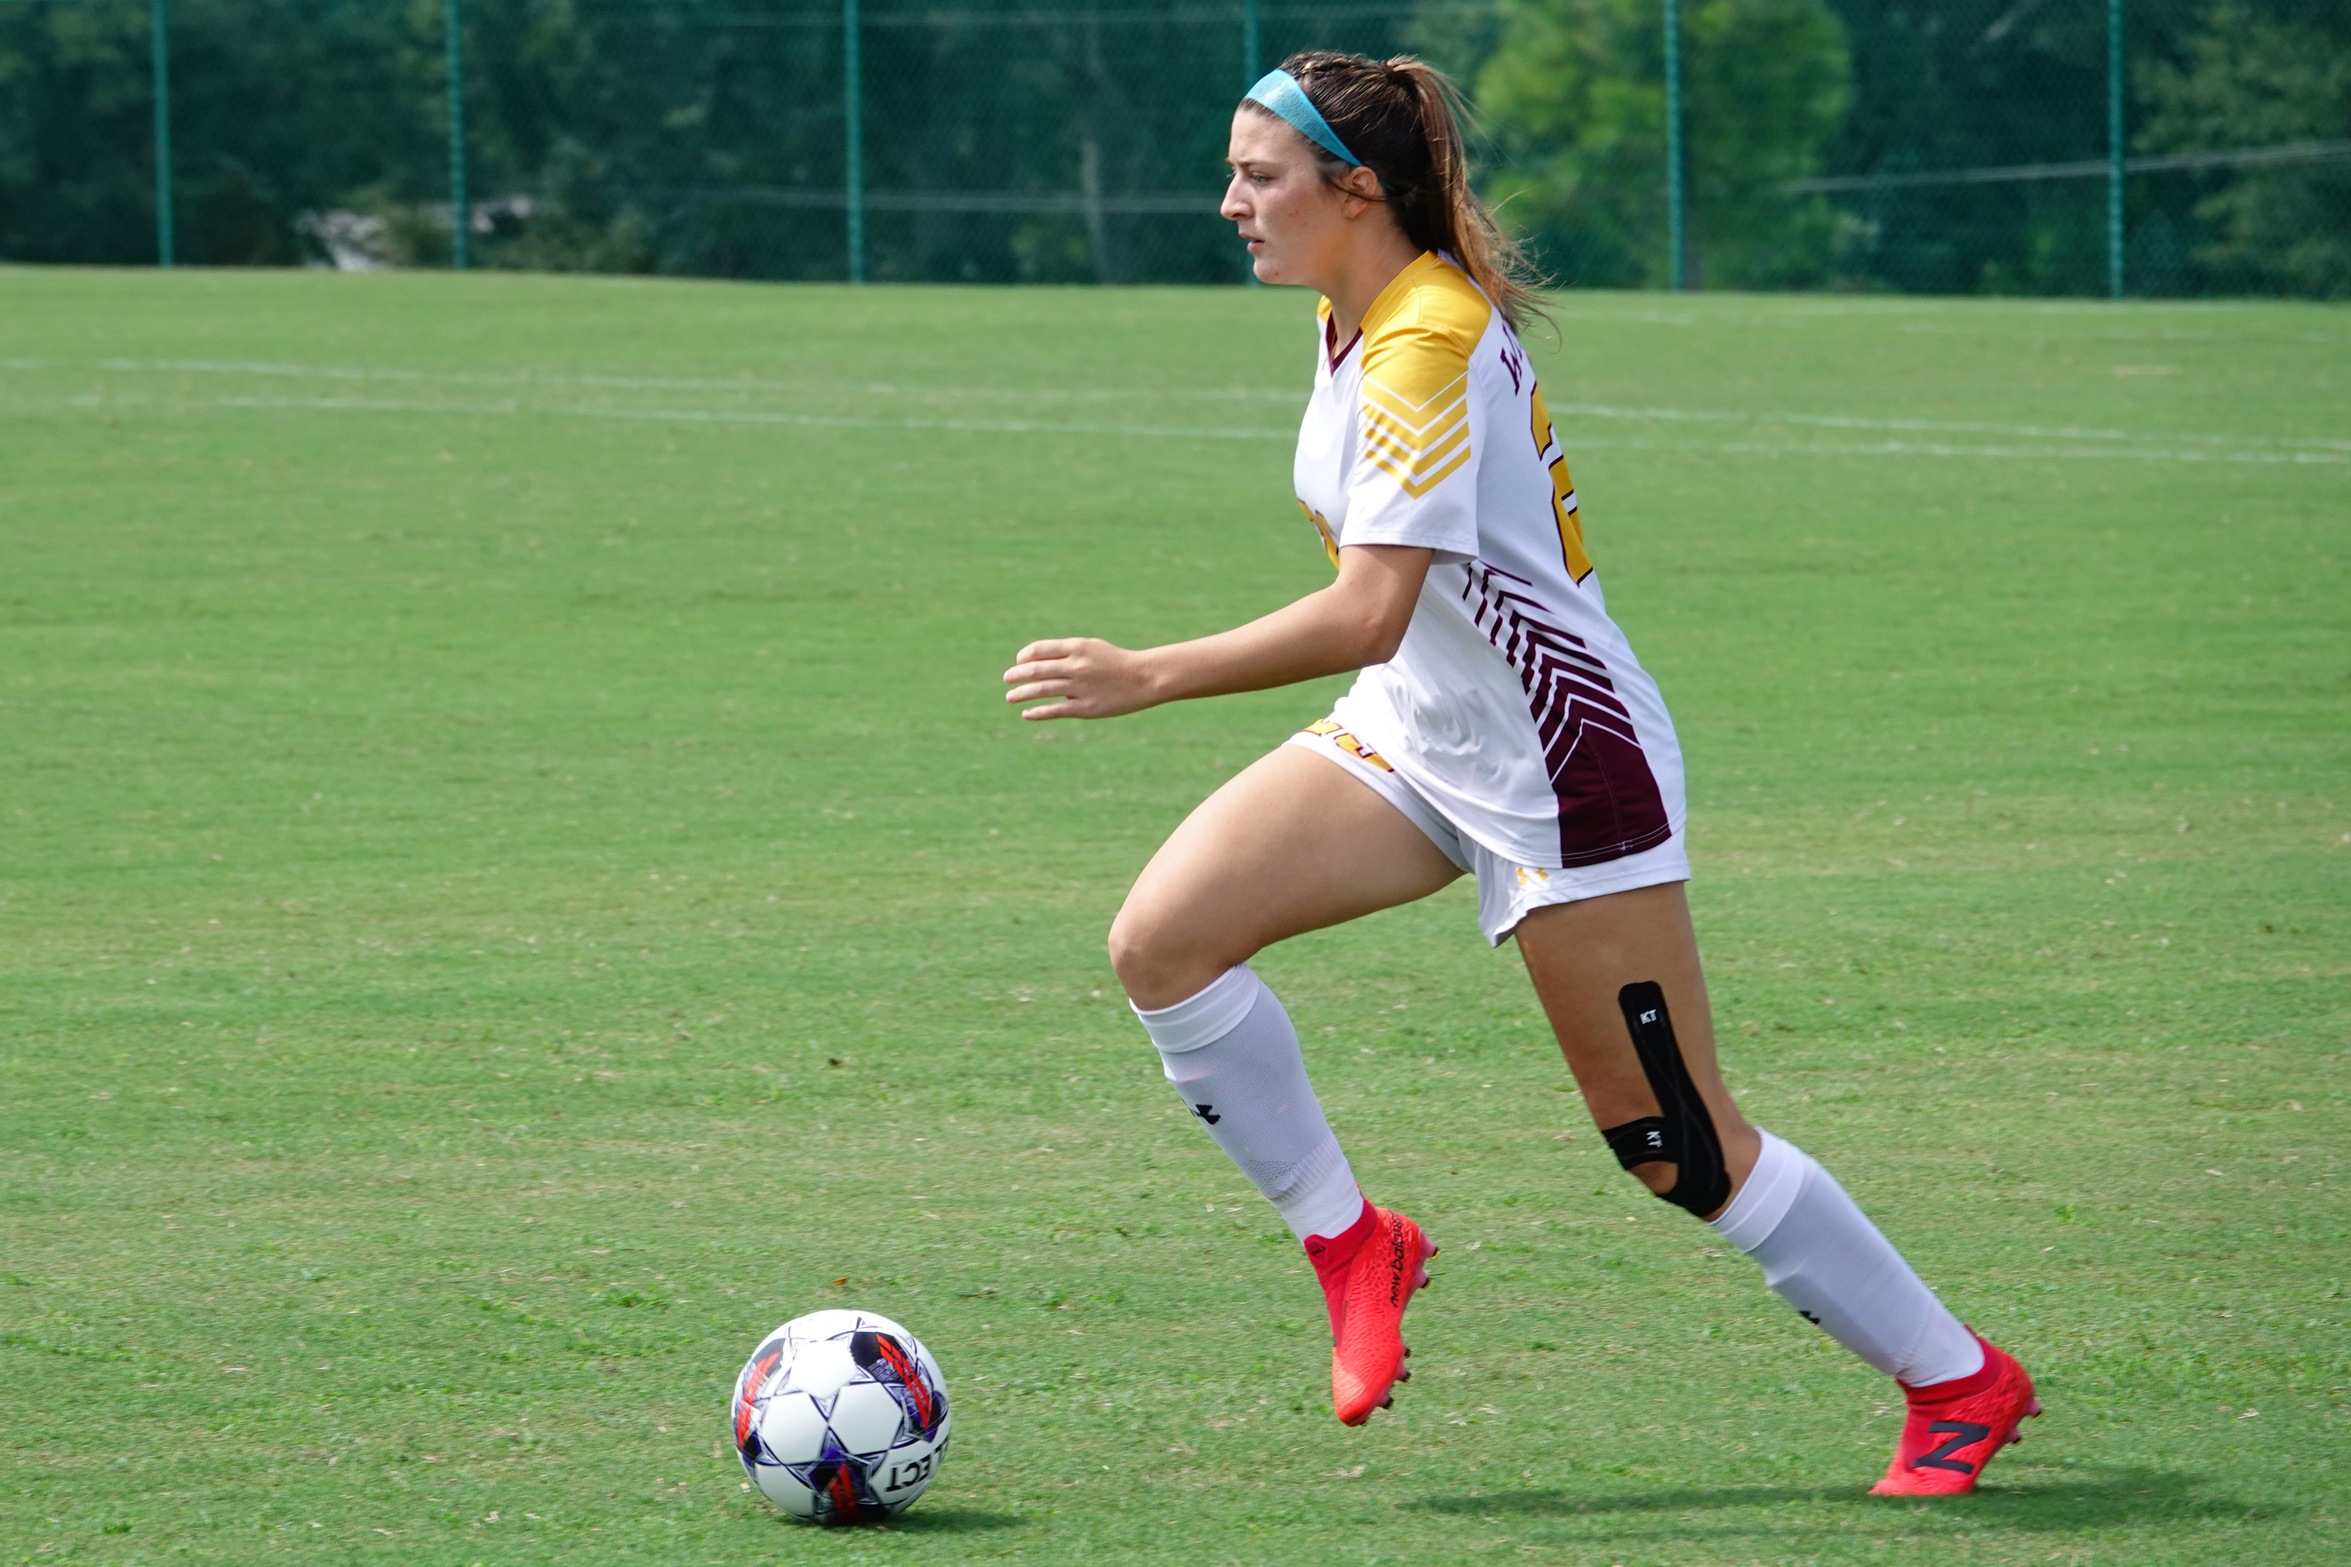 No. 13 PRCC turns in best single-match performance since 2017